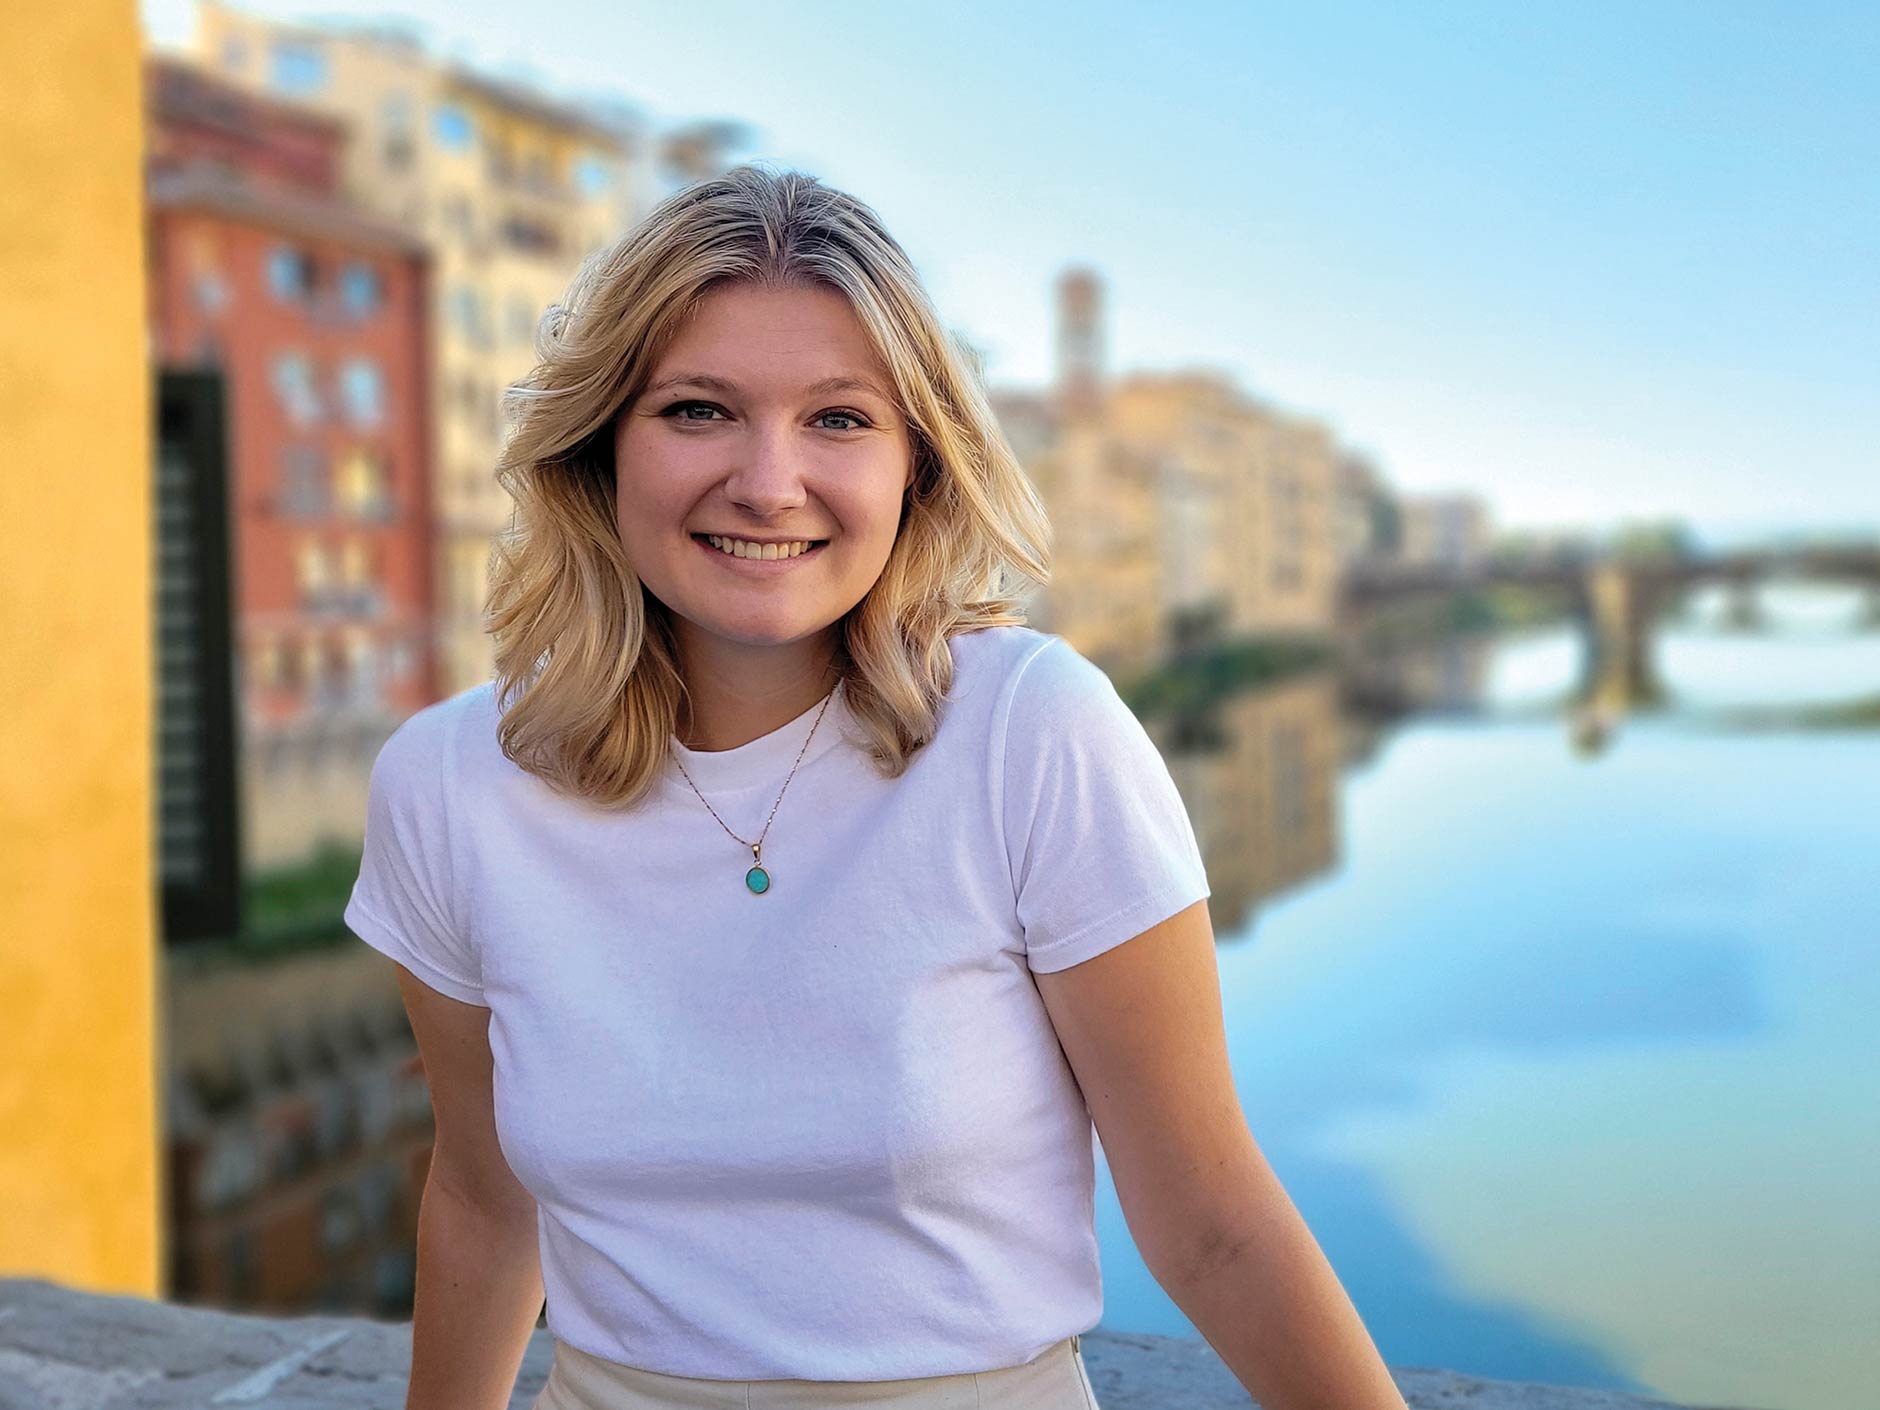 student poses in italy in front of water